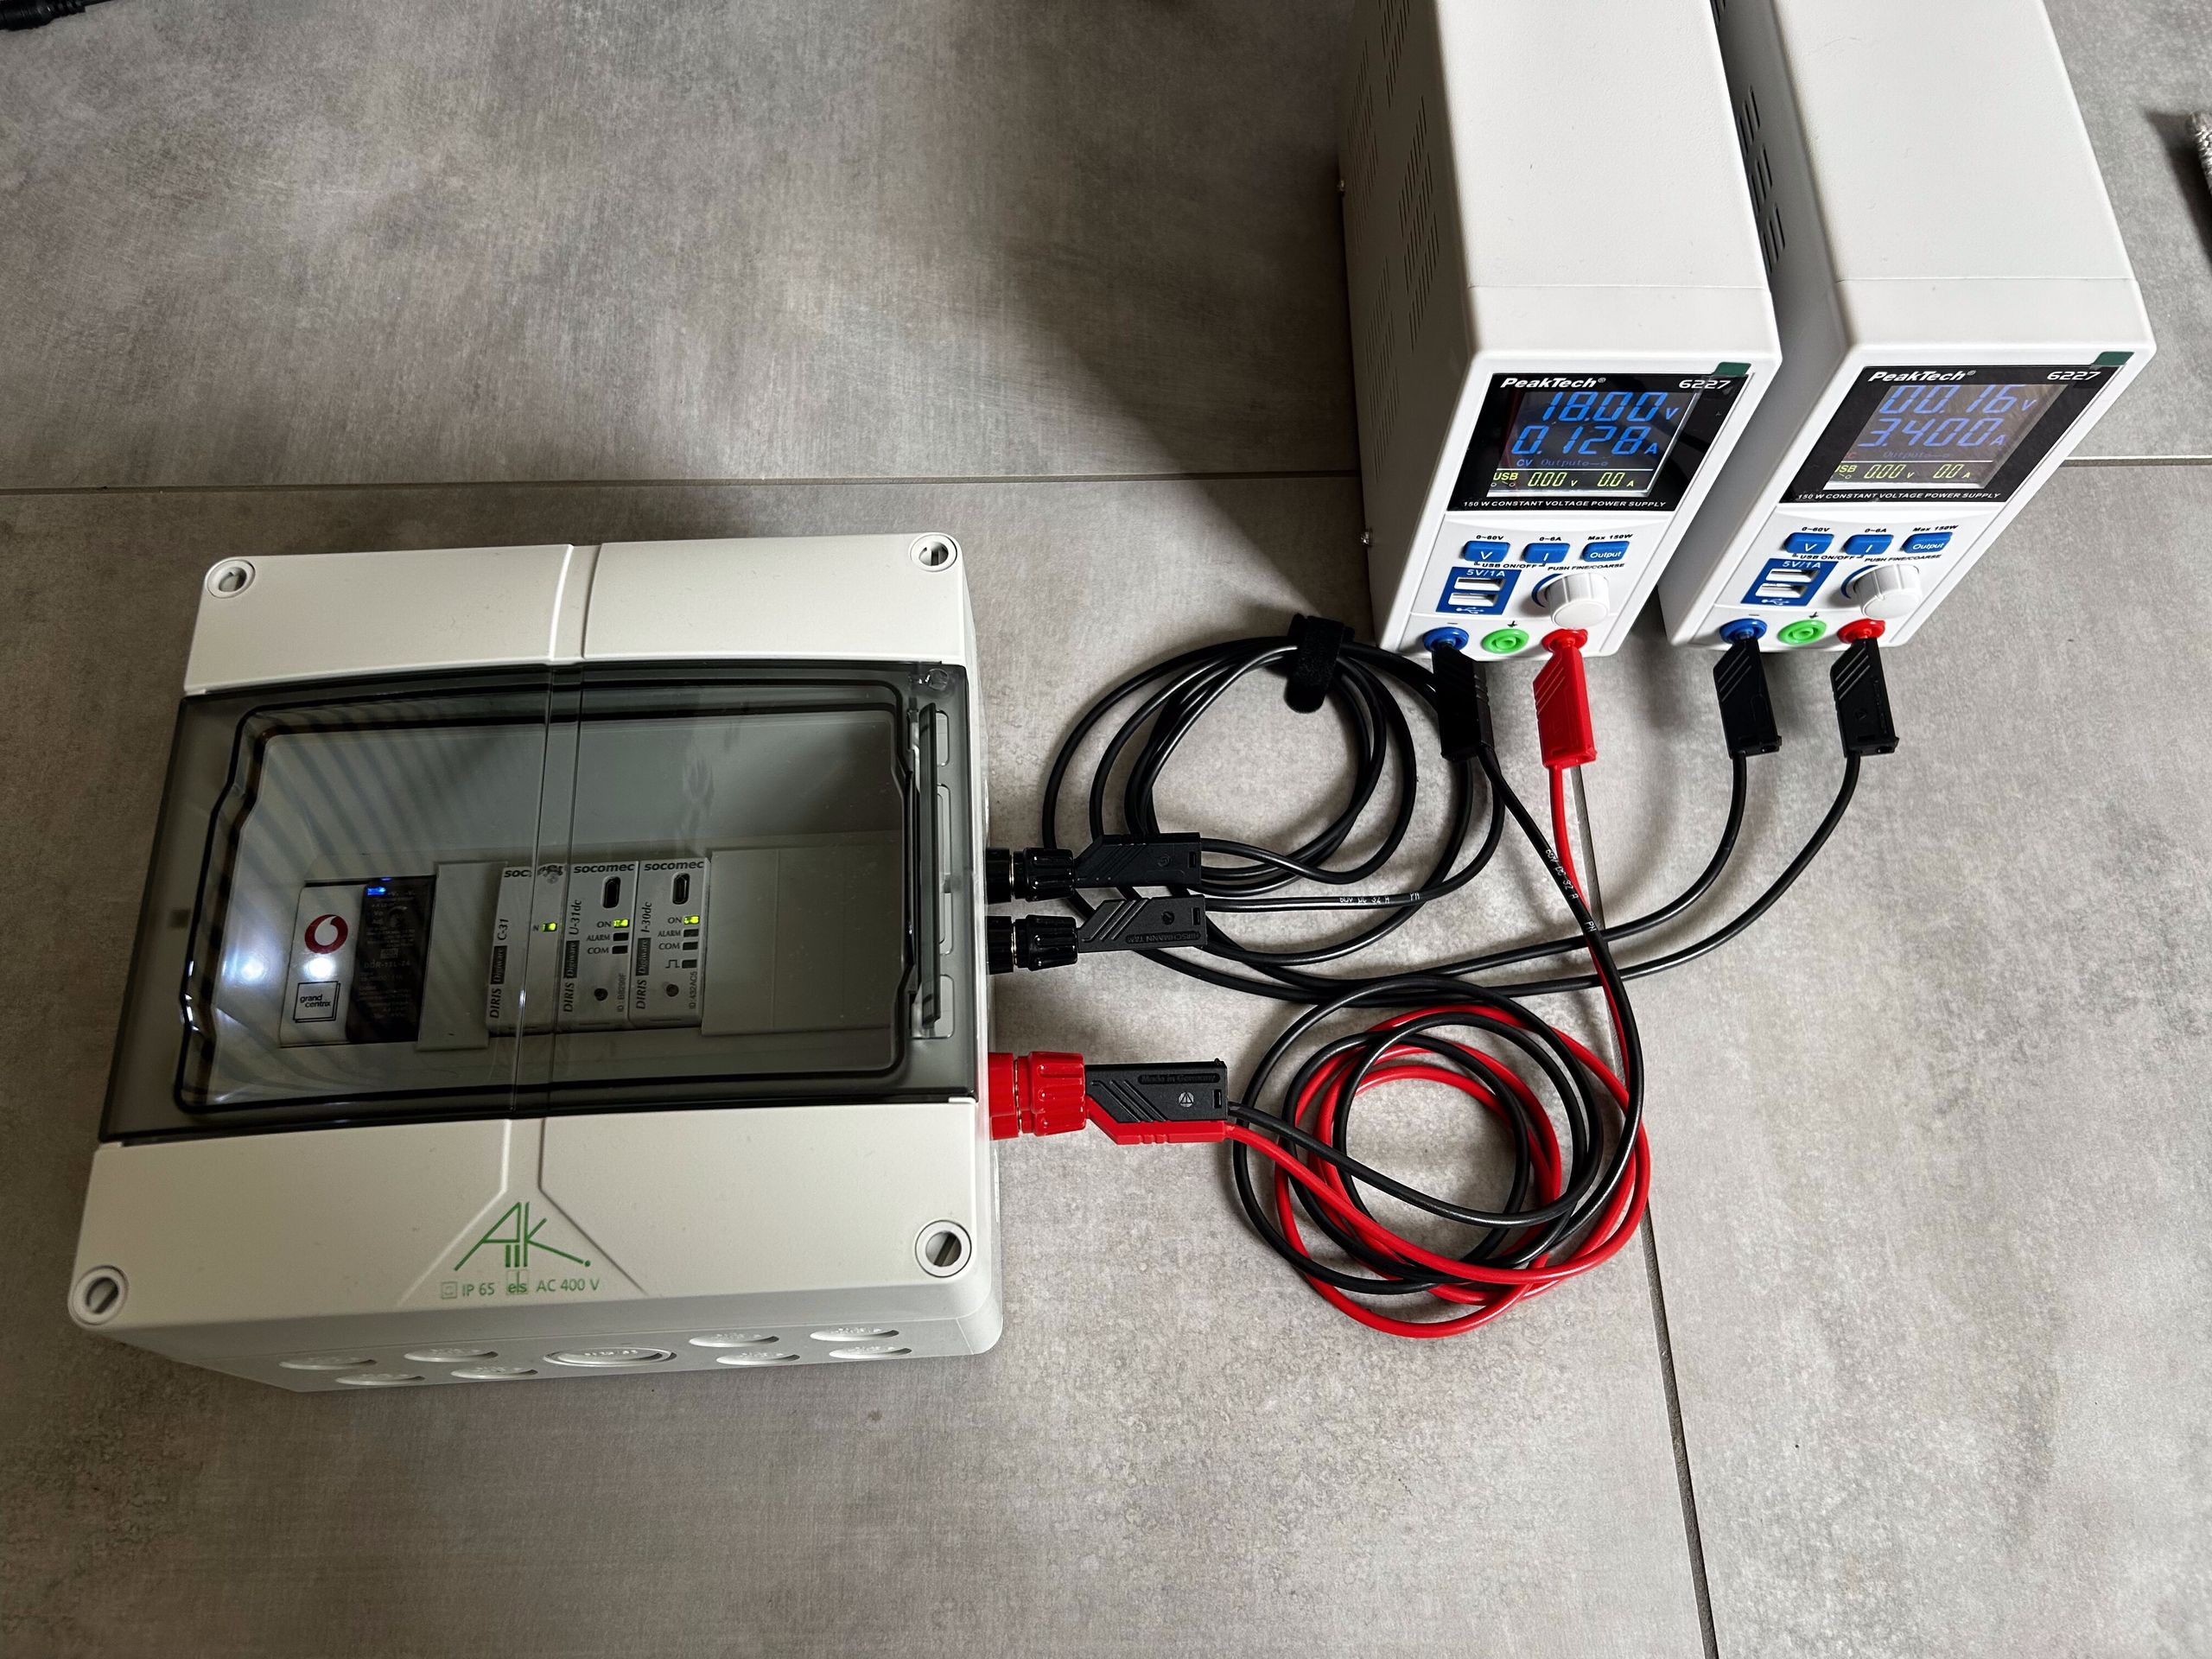 DC voltage and current measurement using laboratory power supplies